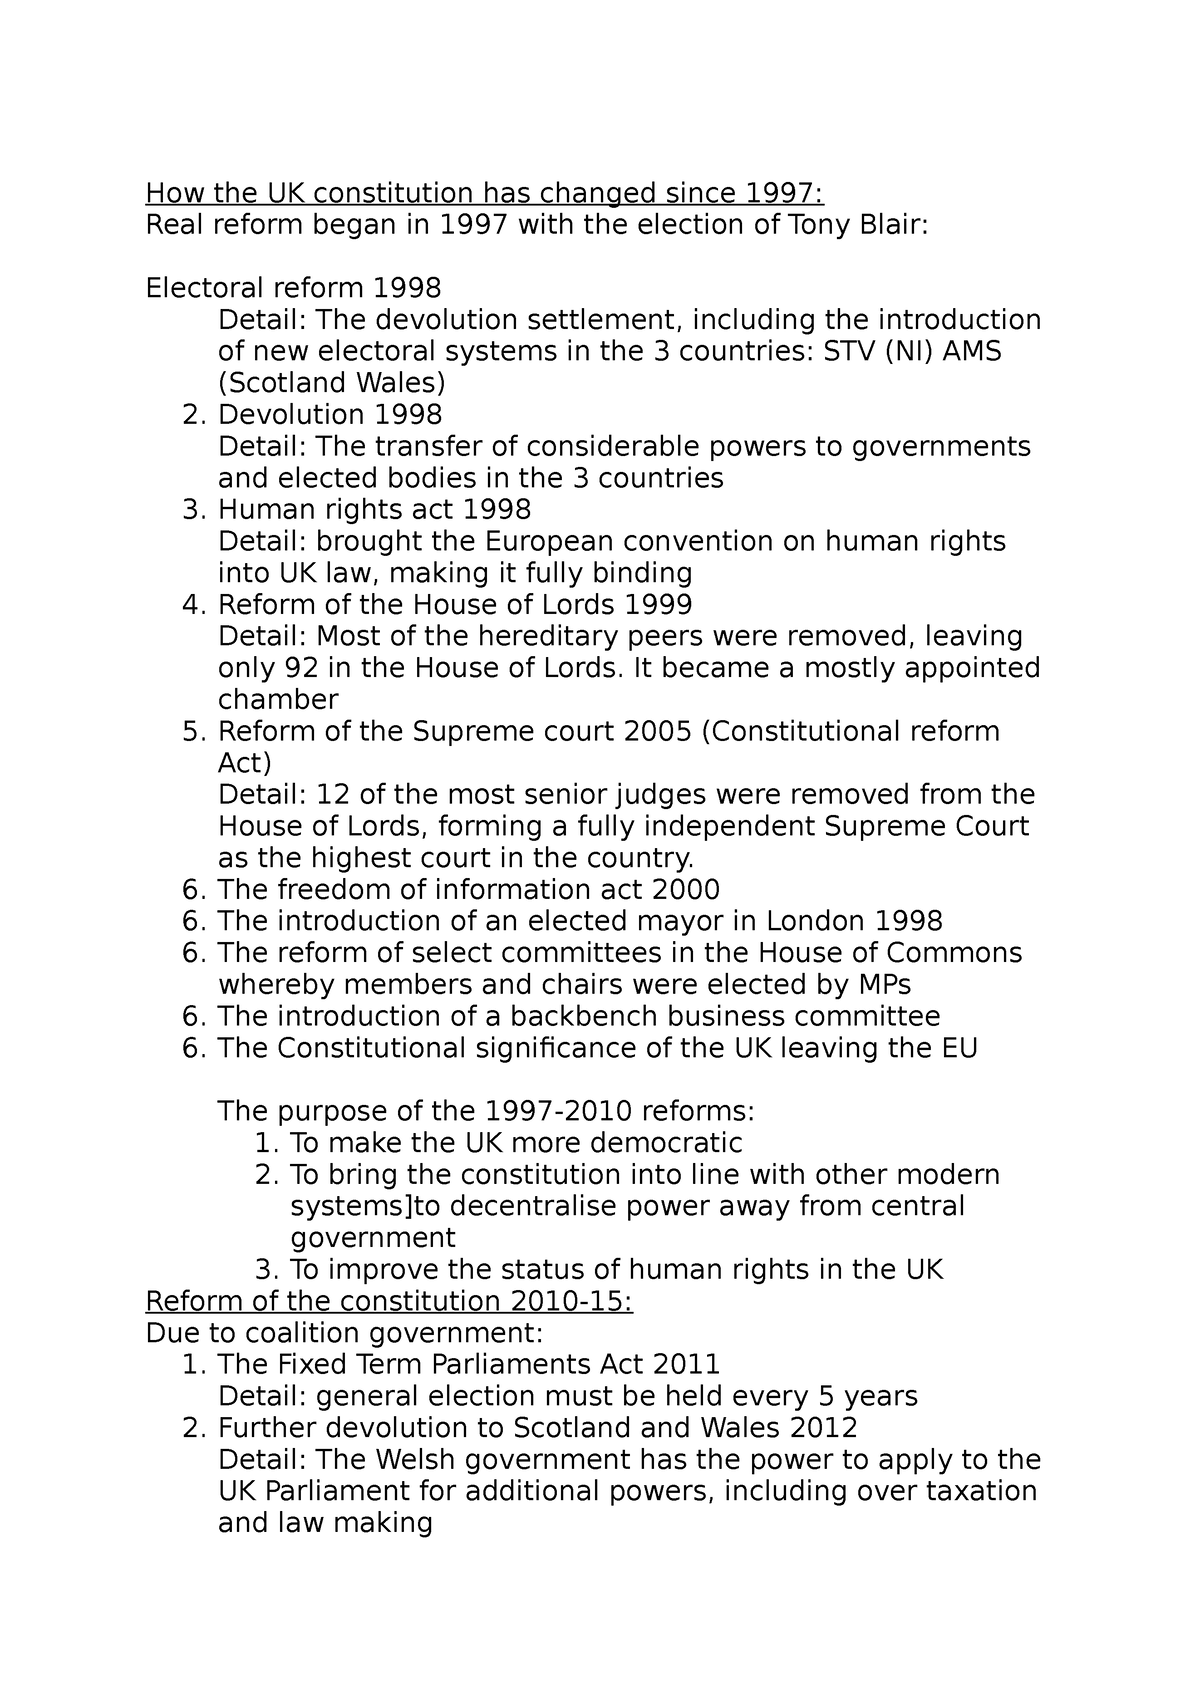 constitutional reform since 1997 essay